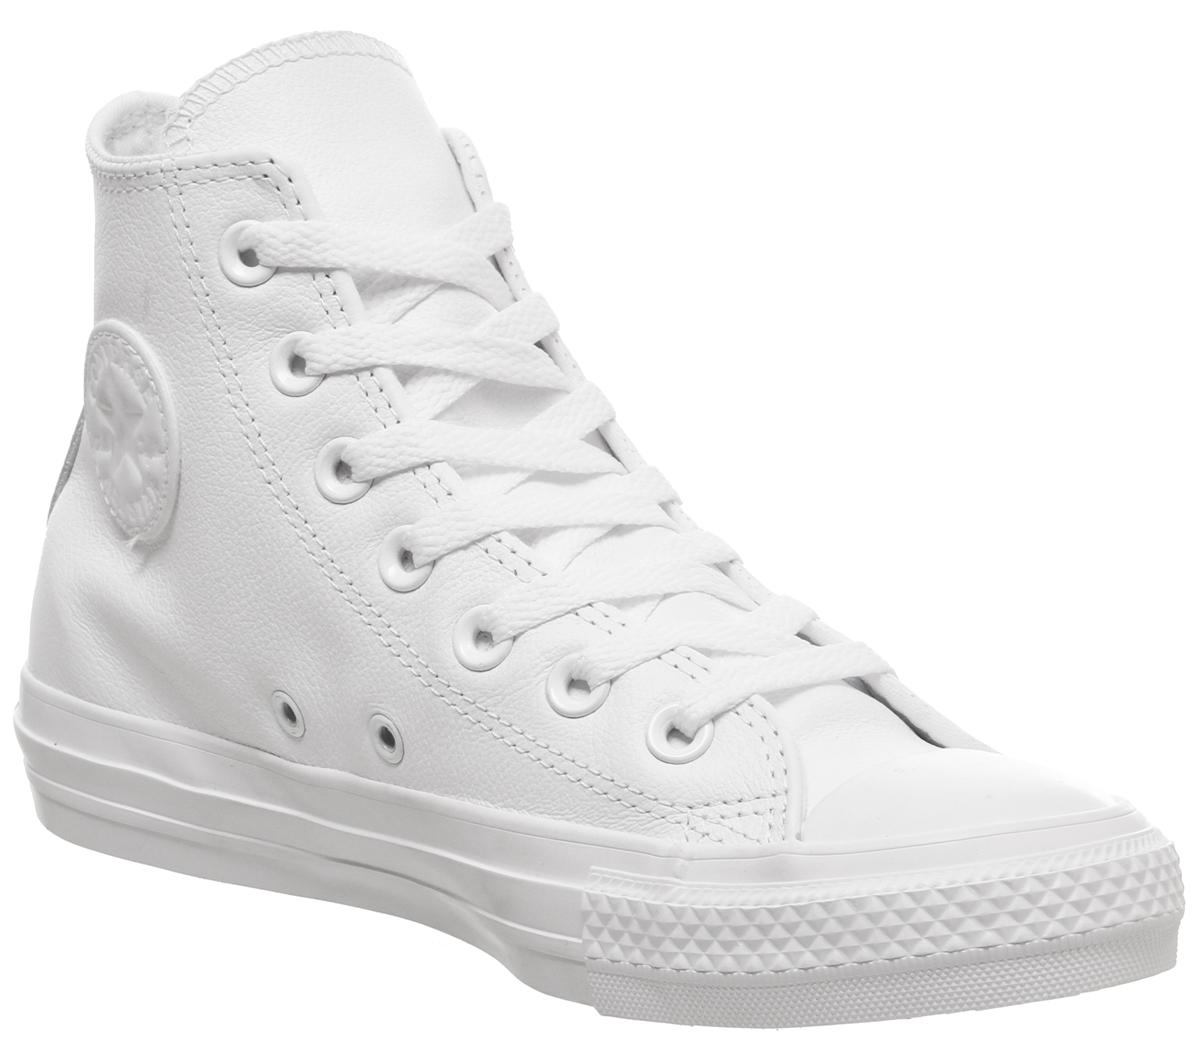 white leather ankle converse, OFF 79 